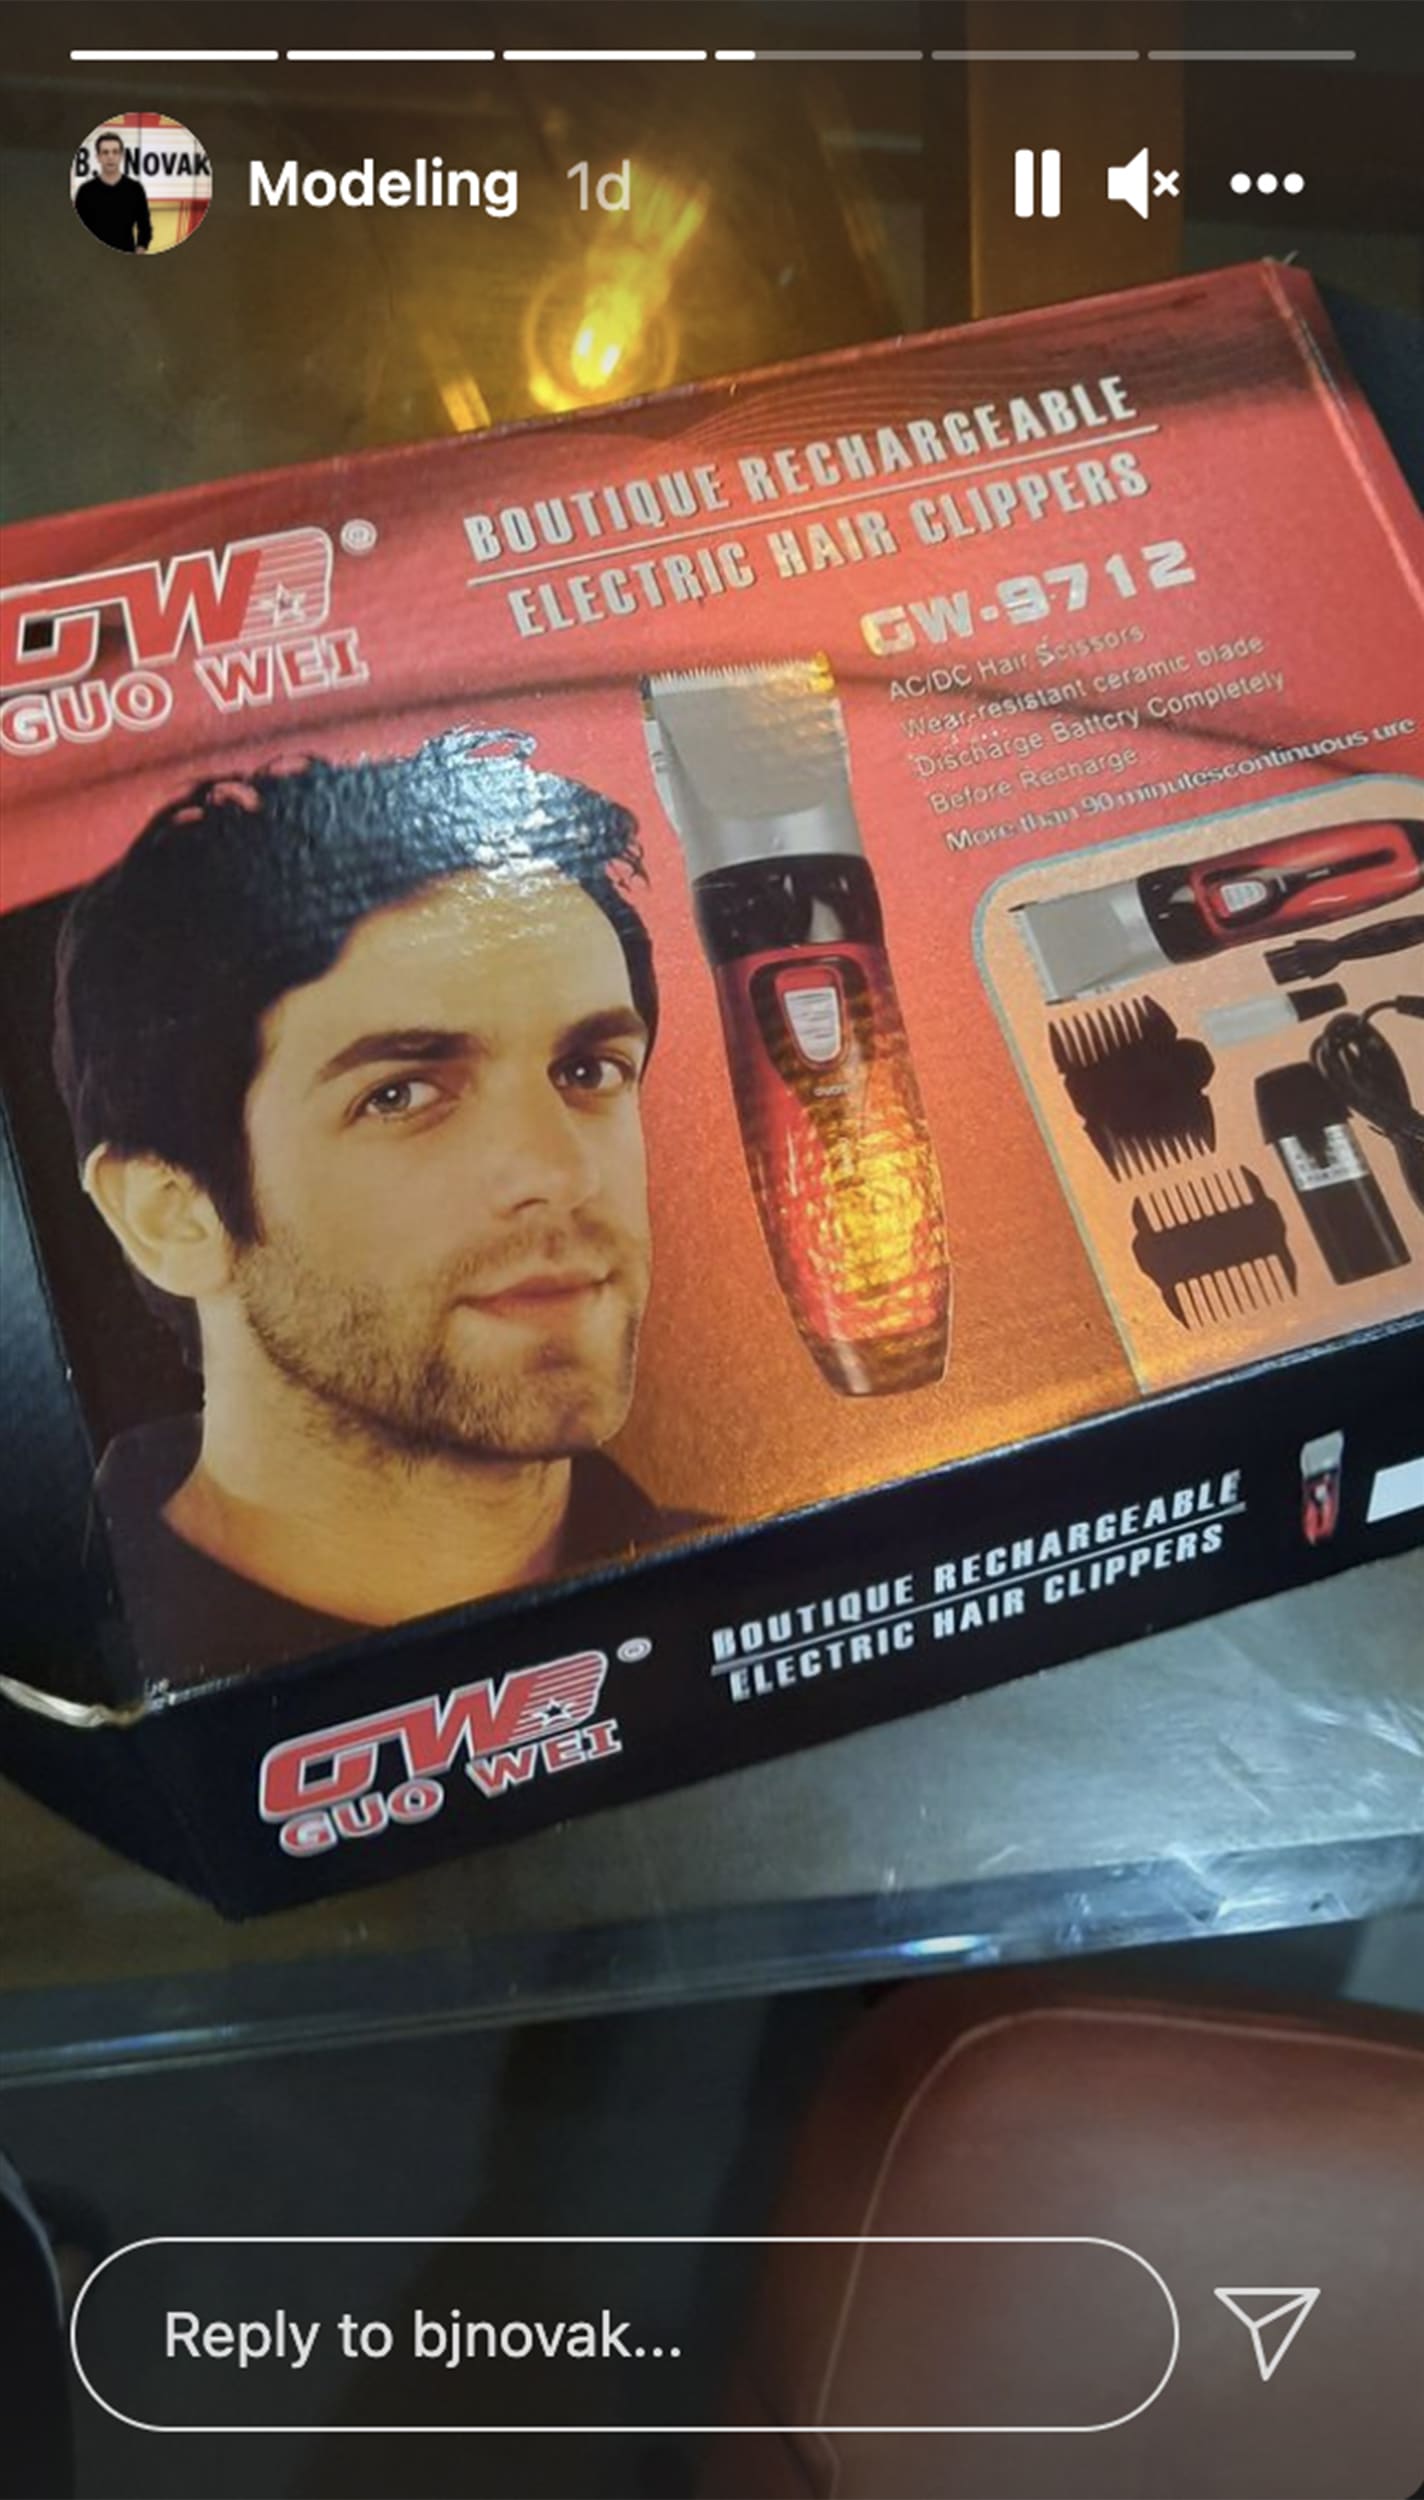 BJ Novak's face is on strange products around the world - Articles